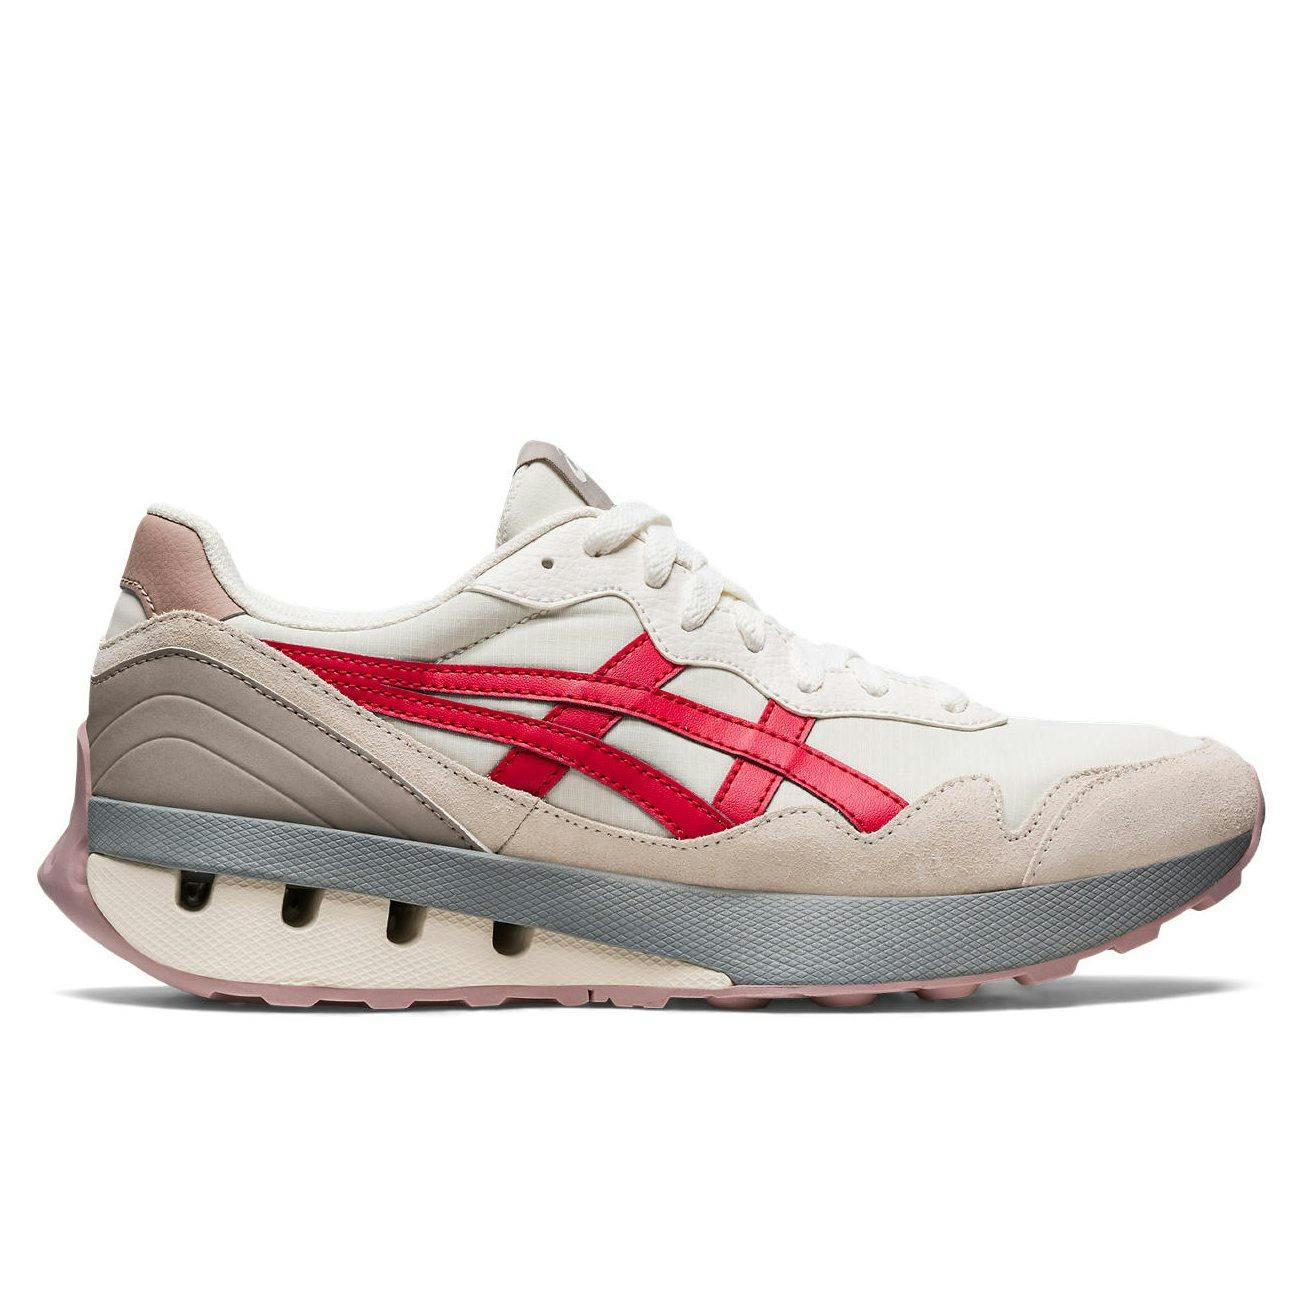 Asics Jogger X81 - Cream/Cayenne Performance Sneakers |